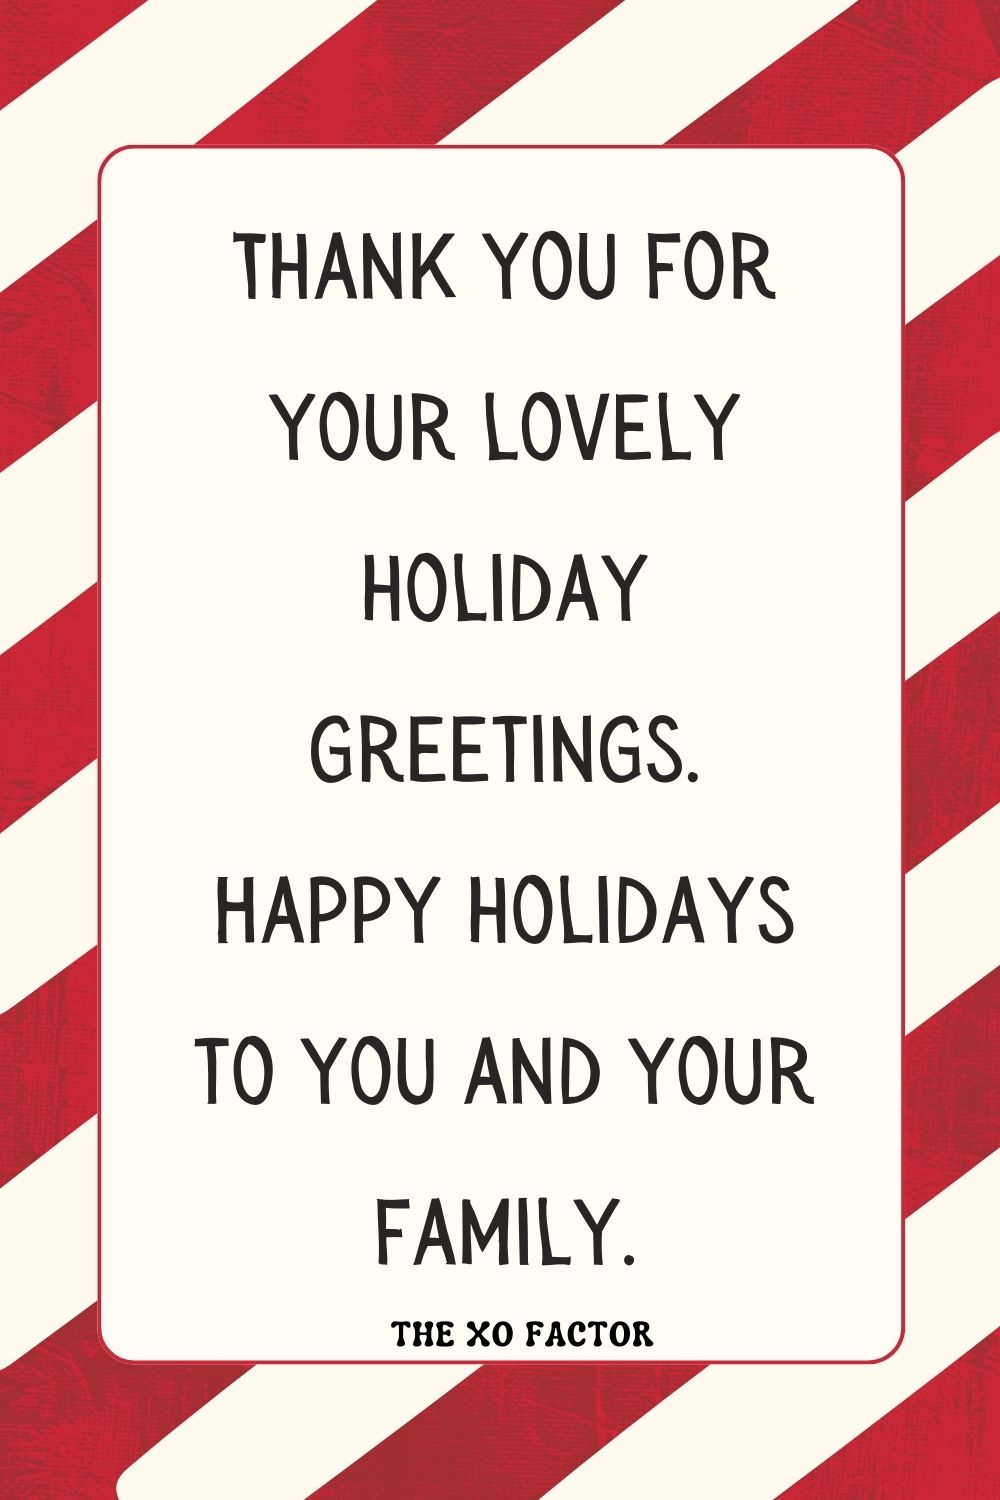 Thank you for your lovely holiday greetings. Happy holidays to you and your family.